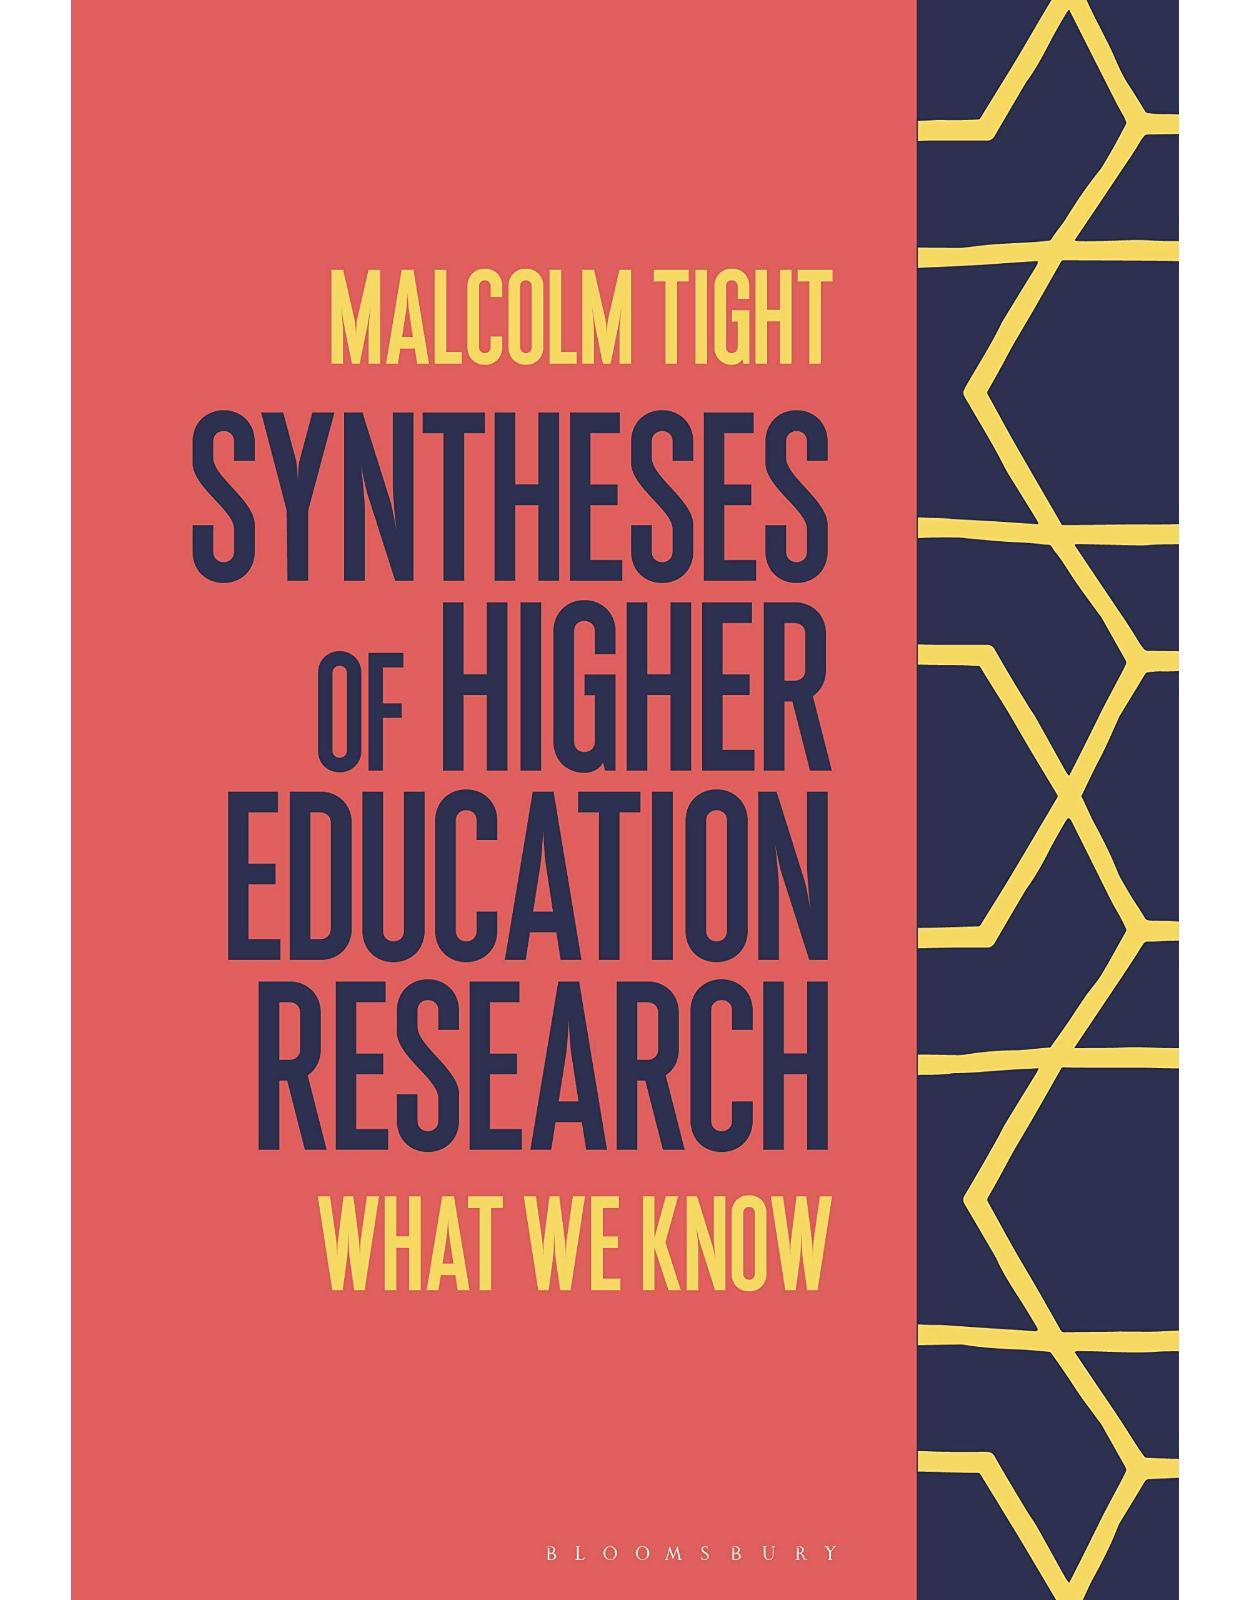 Syntheses of Higher Education Research: What We Know